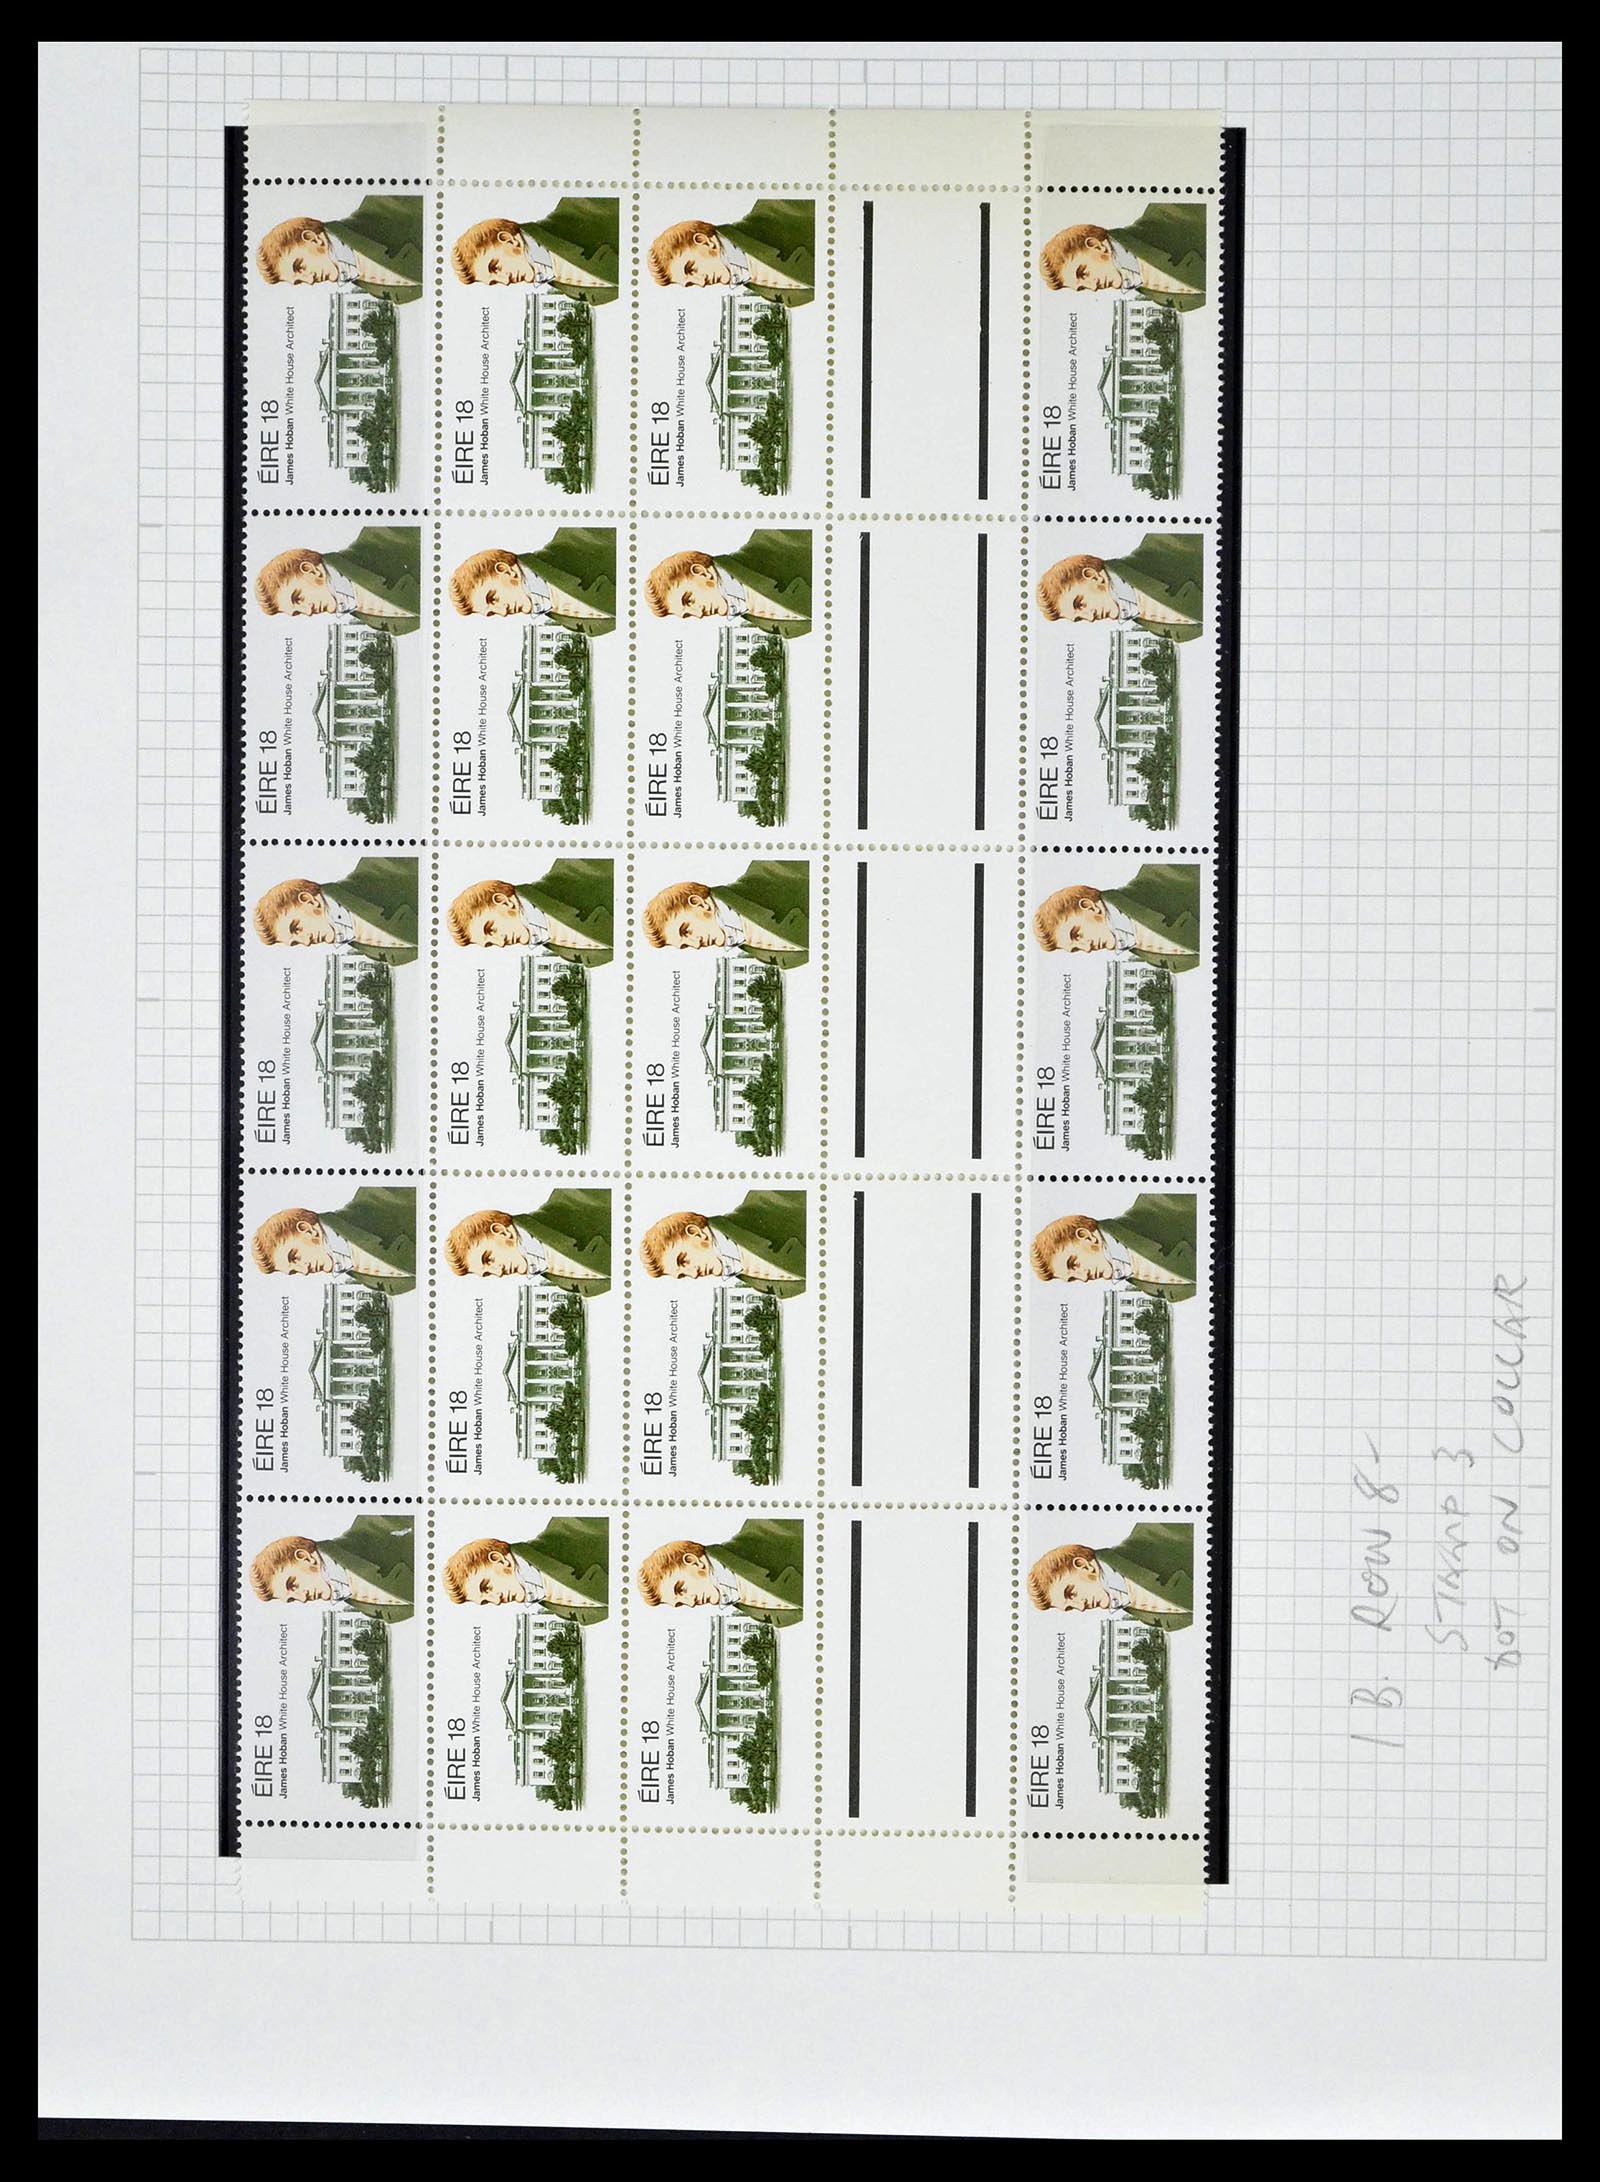 39272 0075 - Stamp collection 39272 Ireland plateflaws and varities 1963-1981.